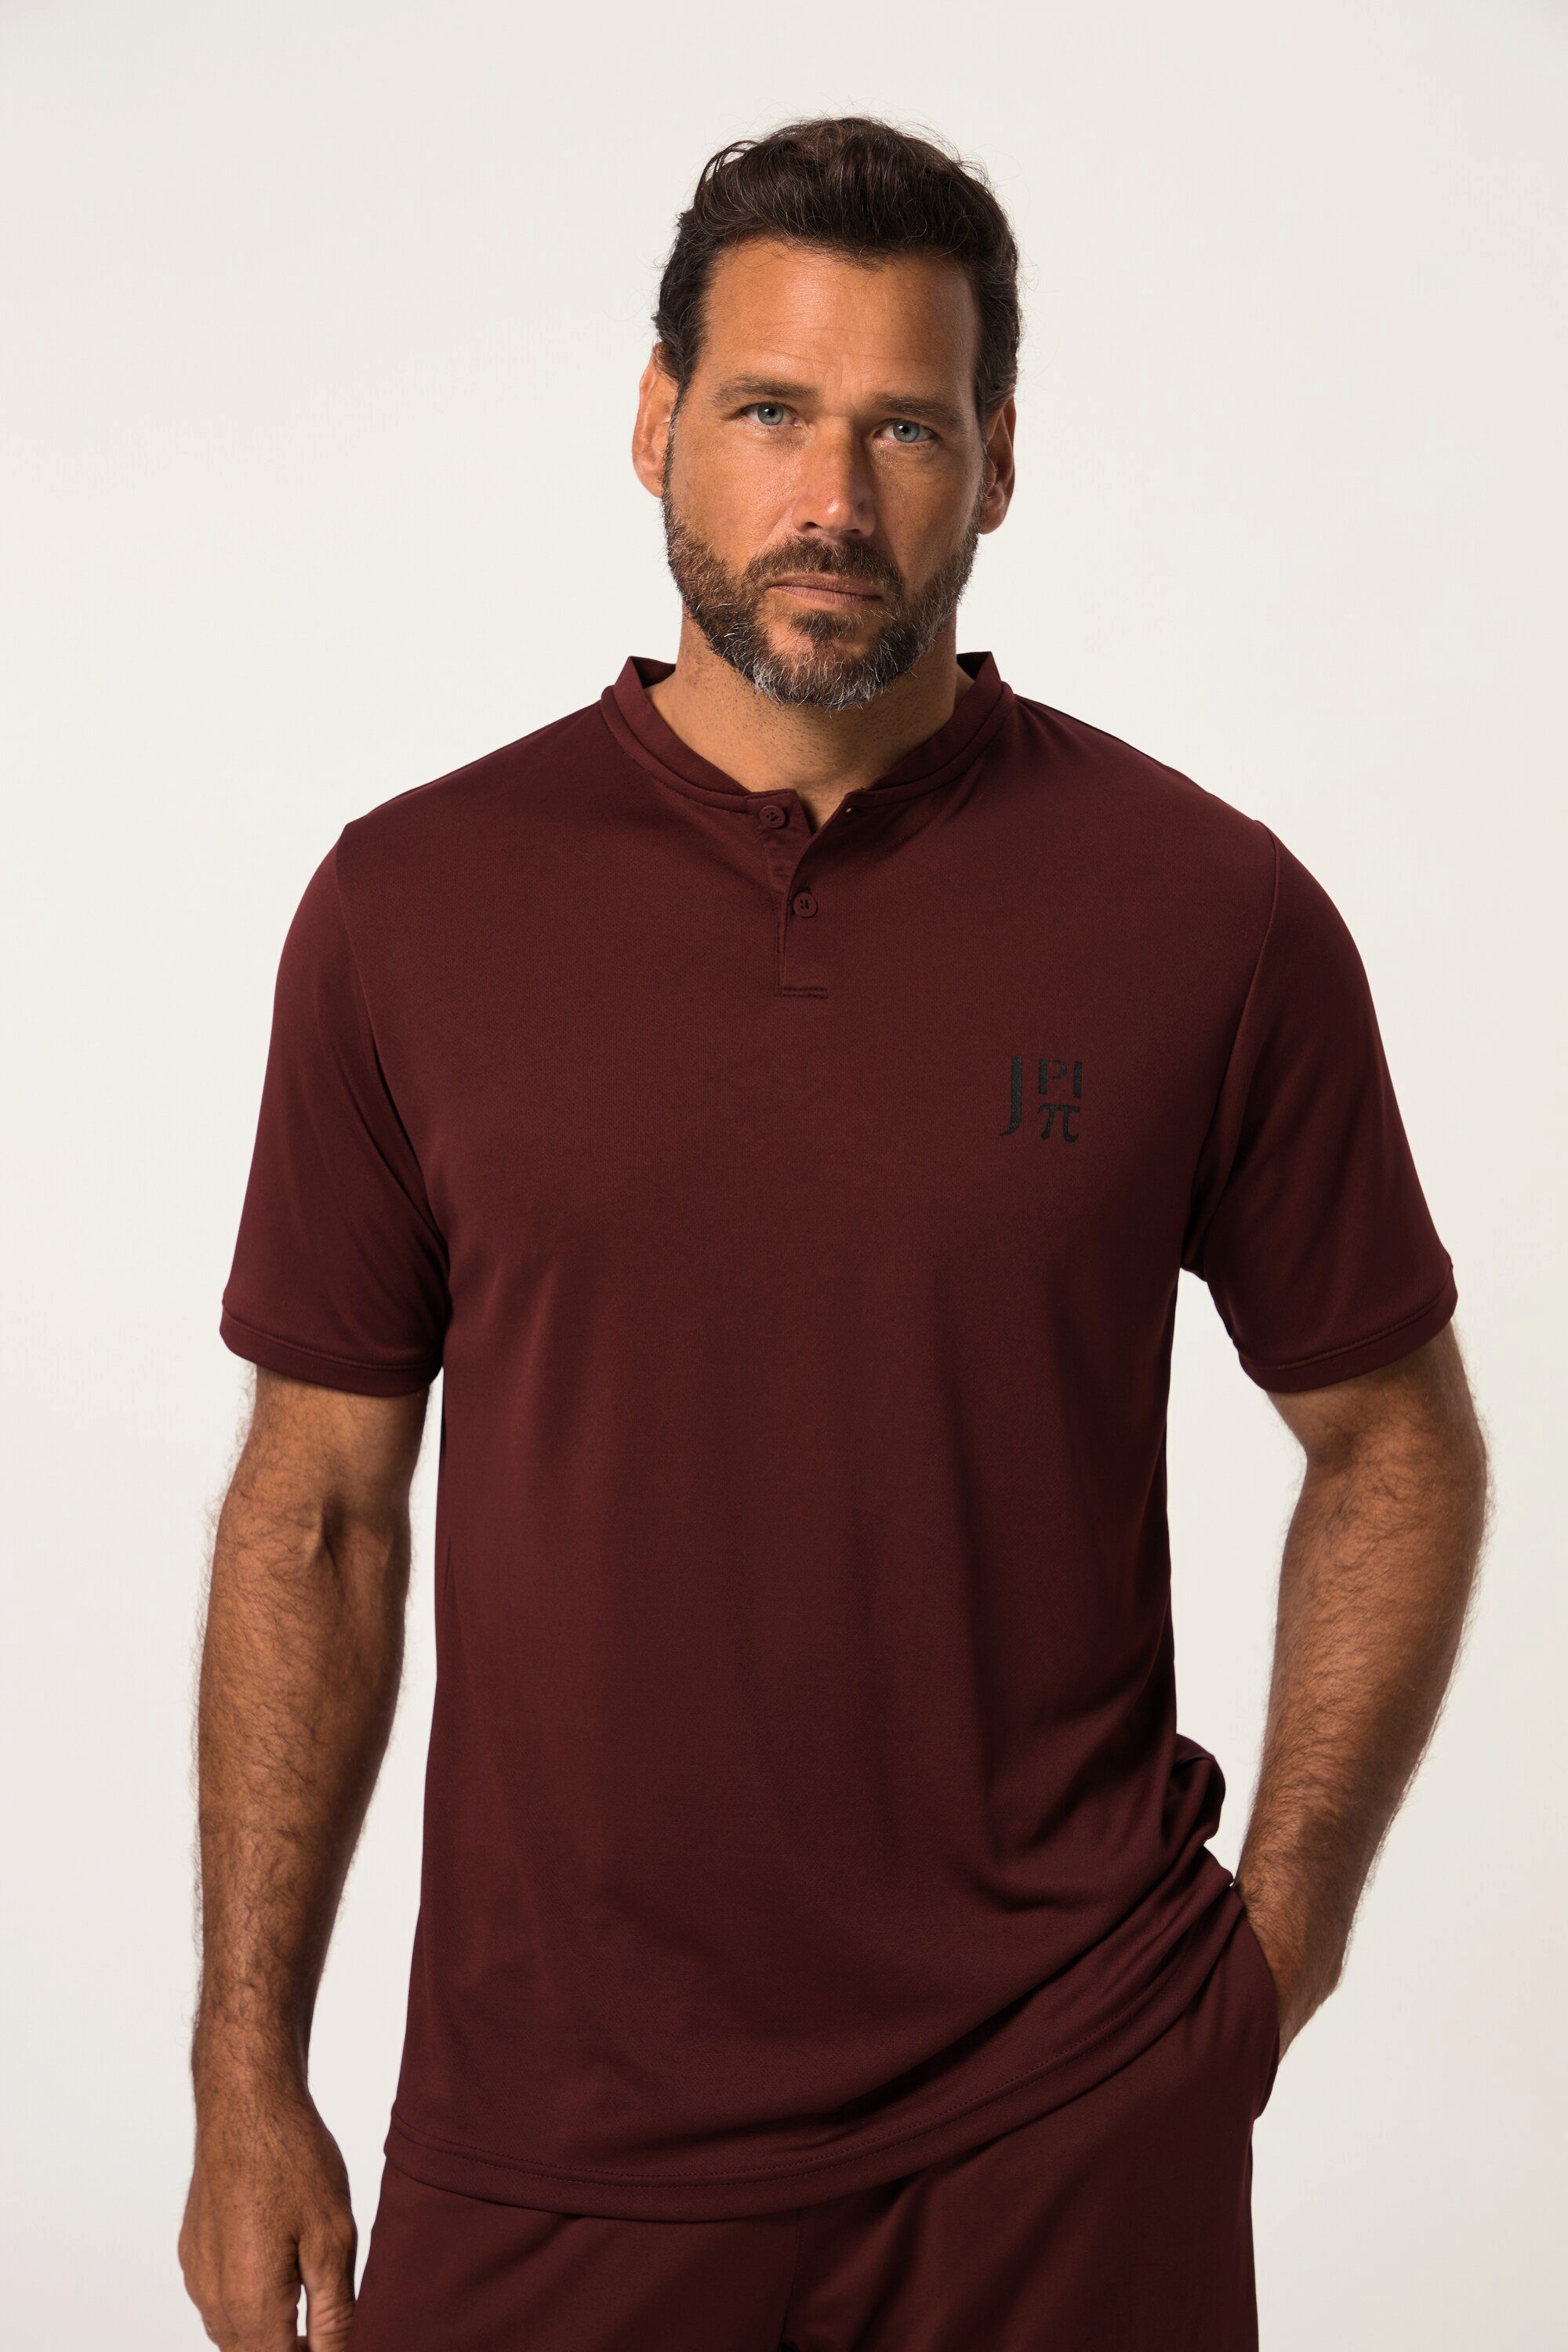 JP1880 rost Halbarm QuickDry Funktions-Henley T-Shirt